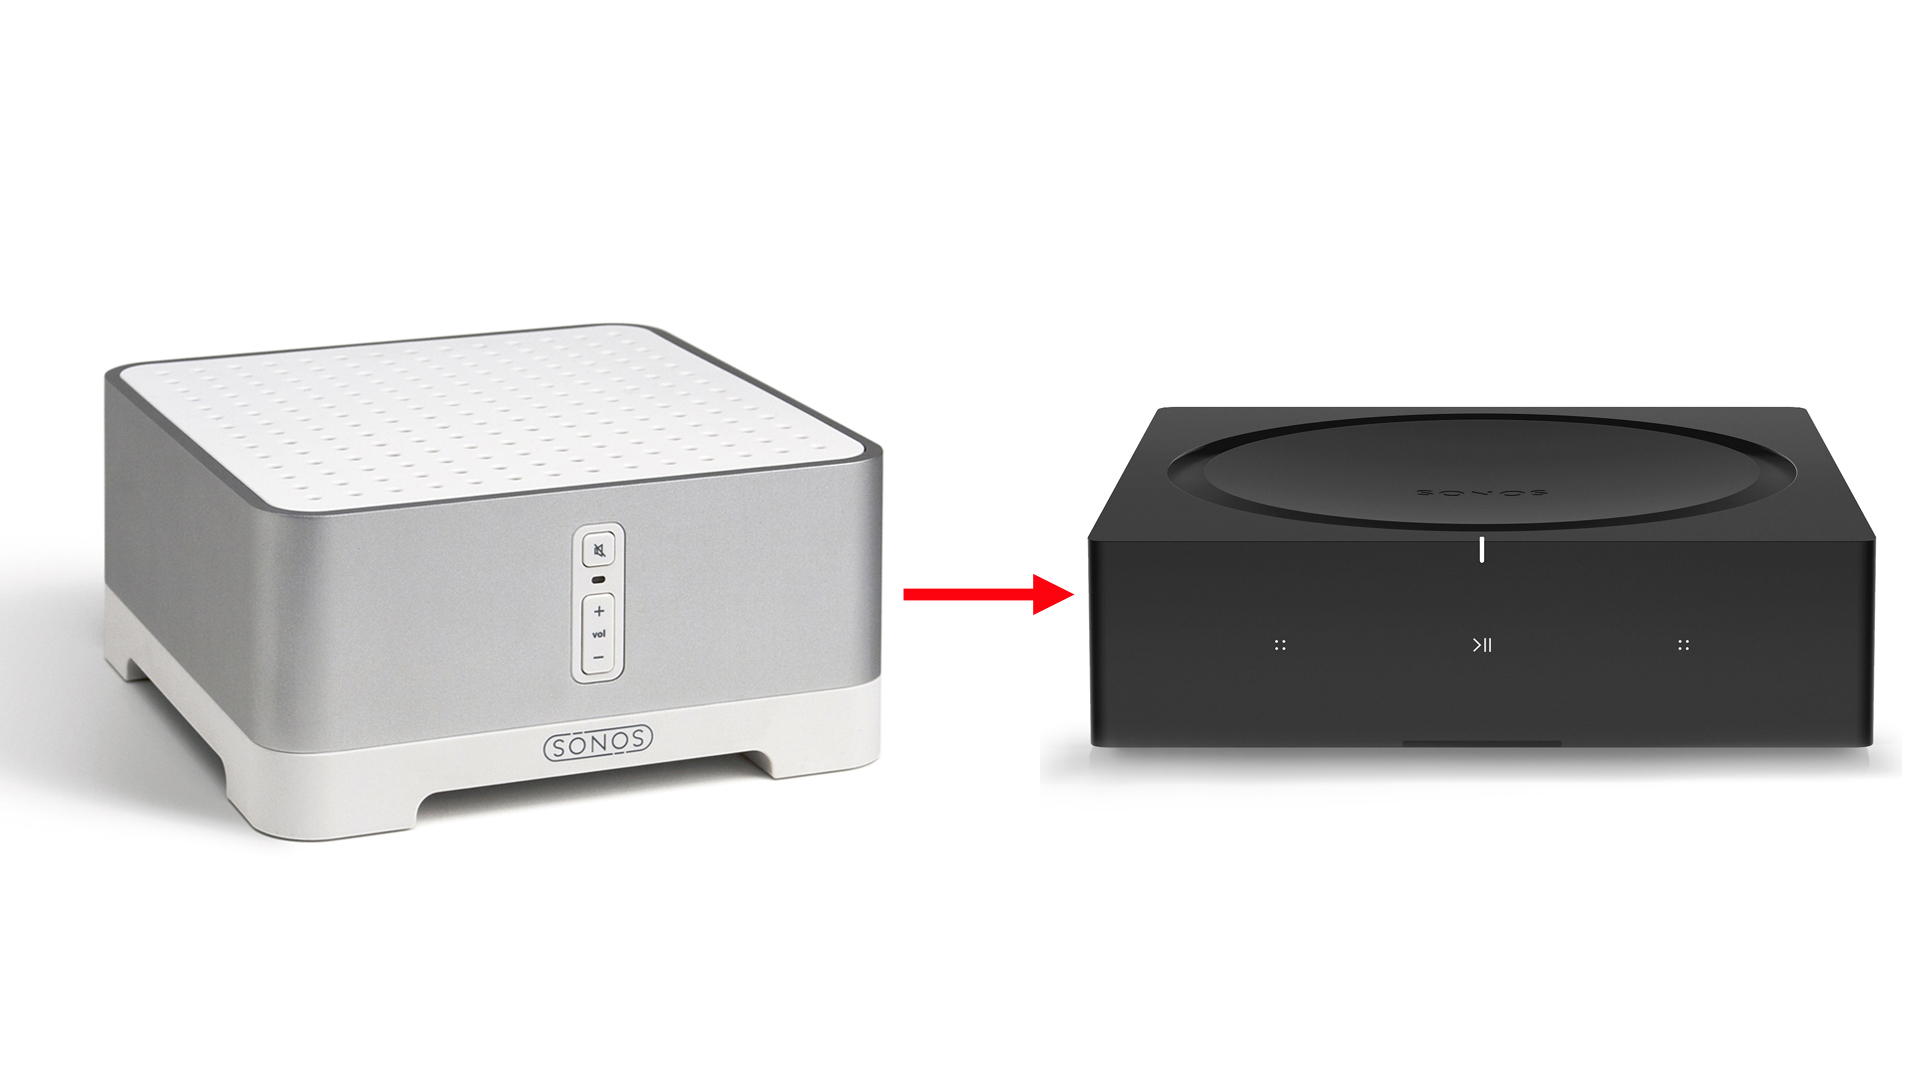 Old "ZP120" (left), new "Amp" (right) (Pictures: Sonos)